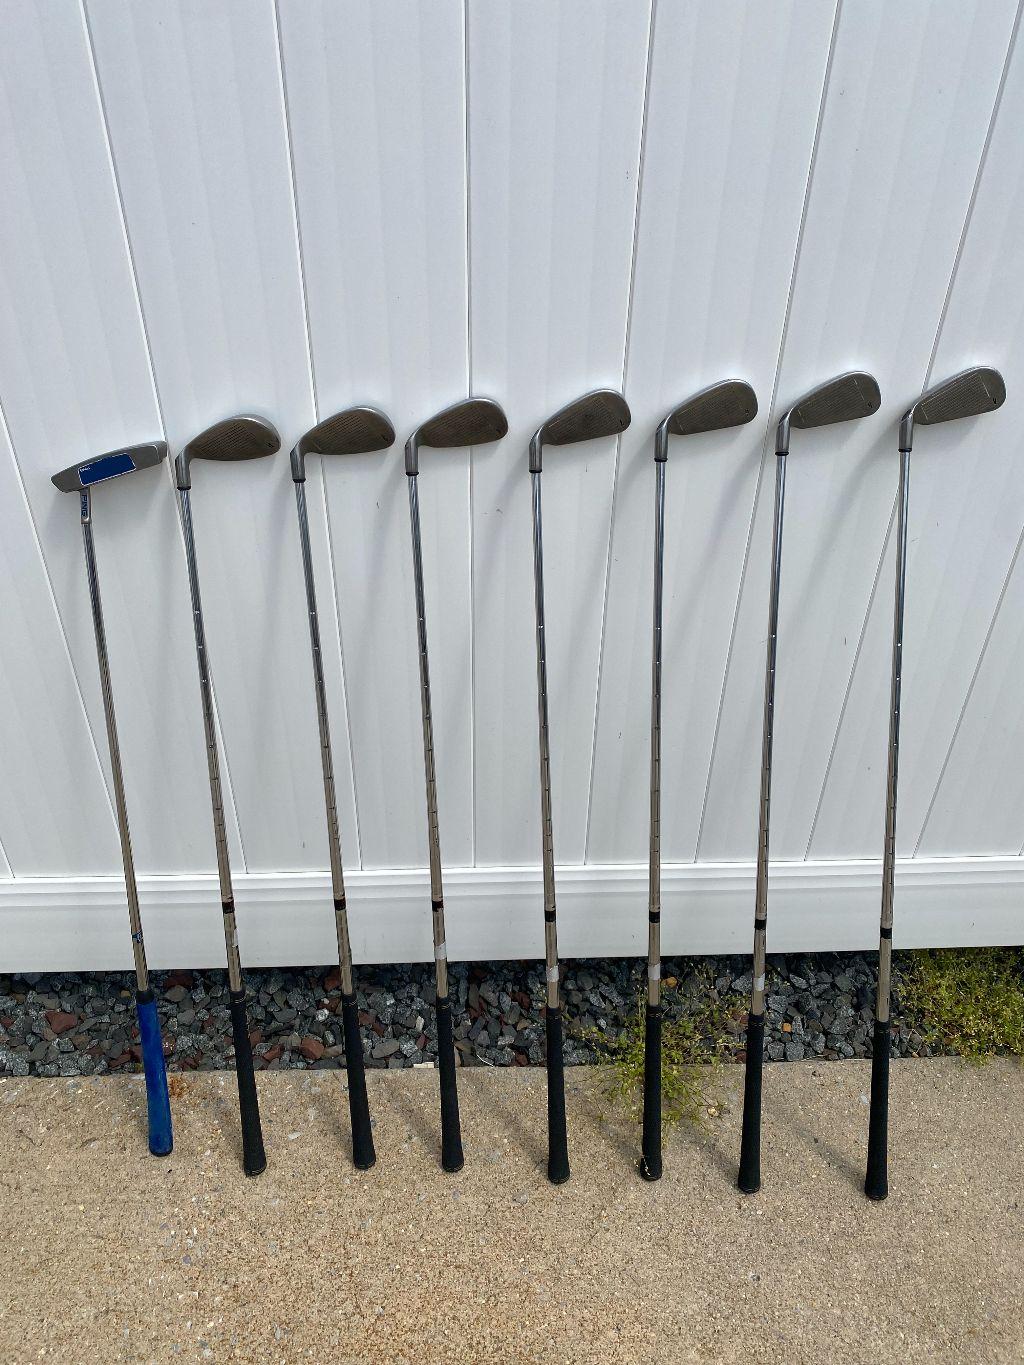 New to You Set of Irons